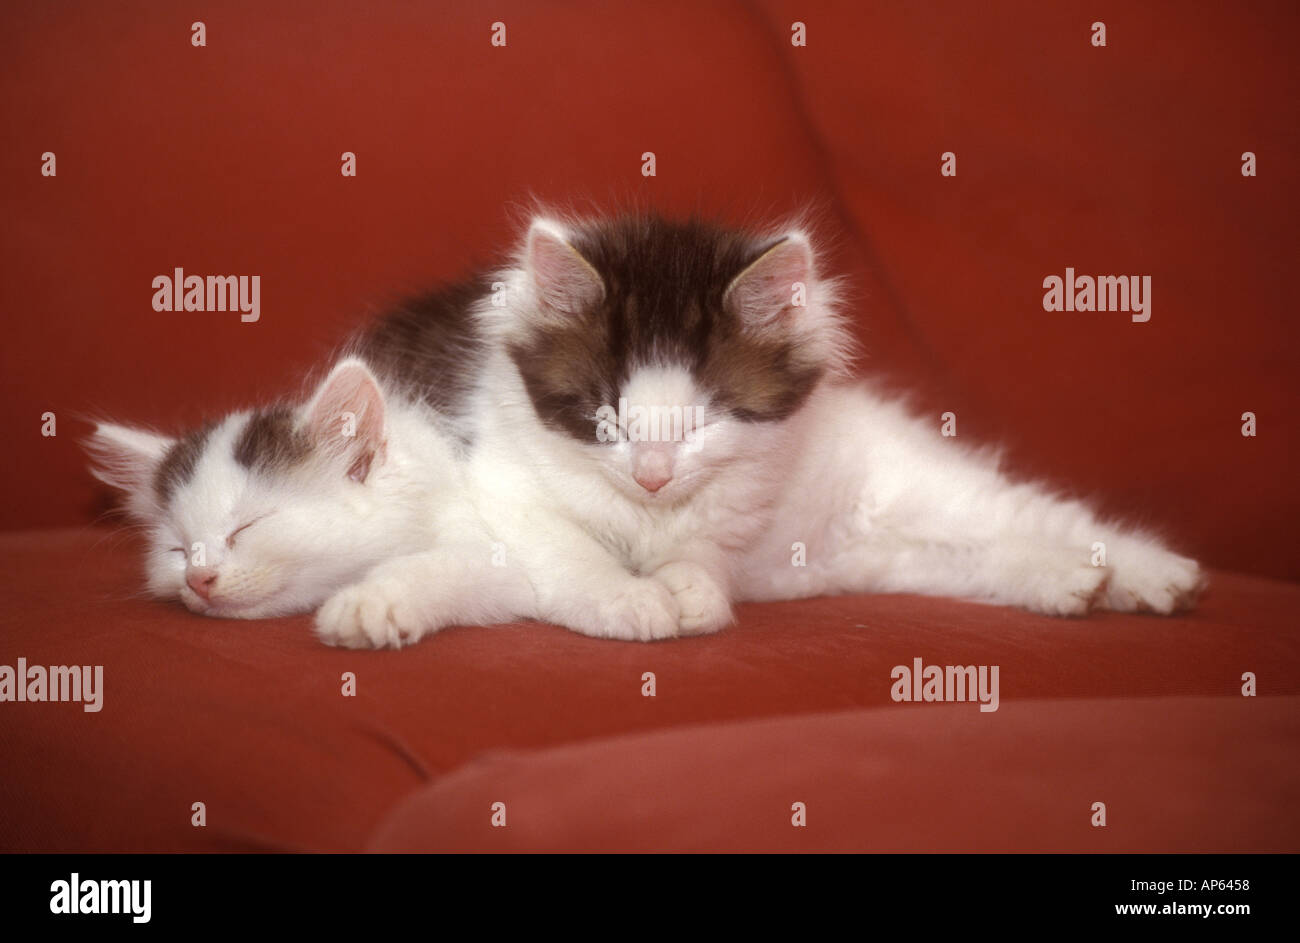 cute image of kittens sleeping, one on top of the other Stock Photo